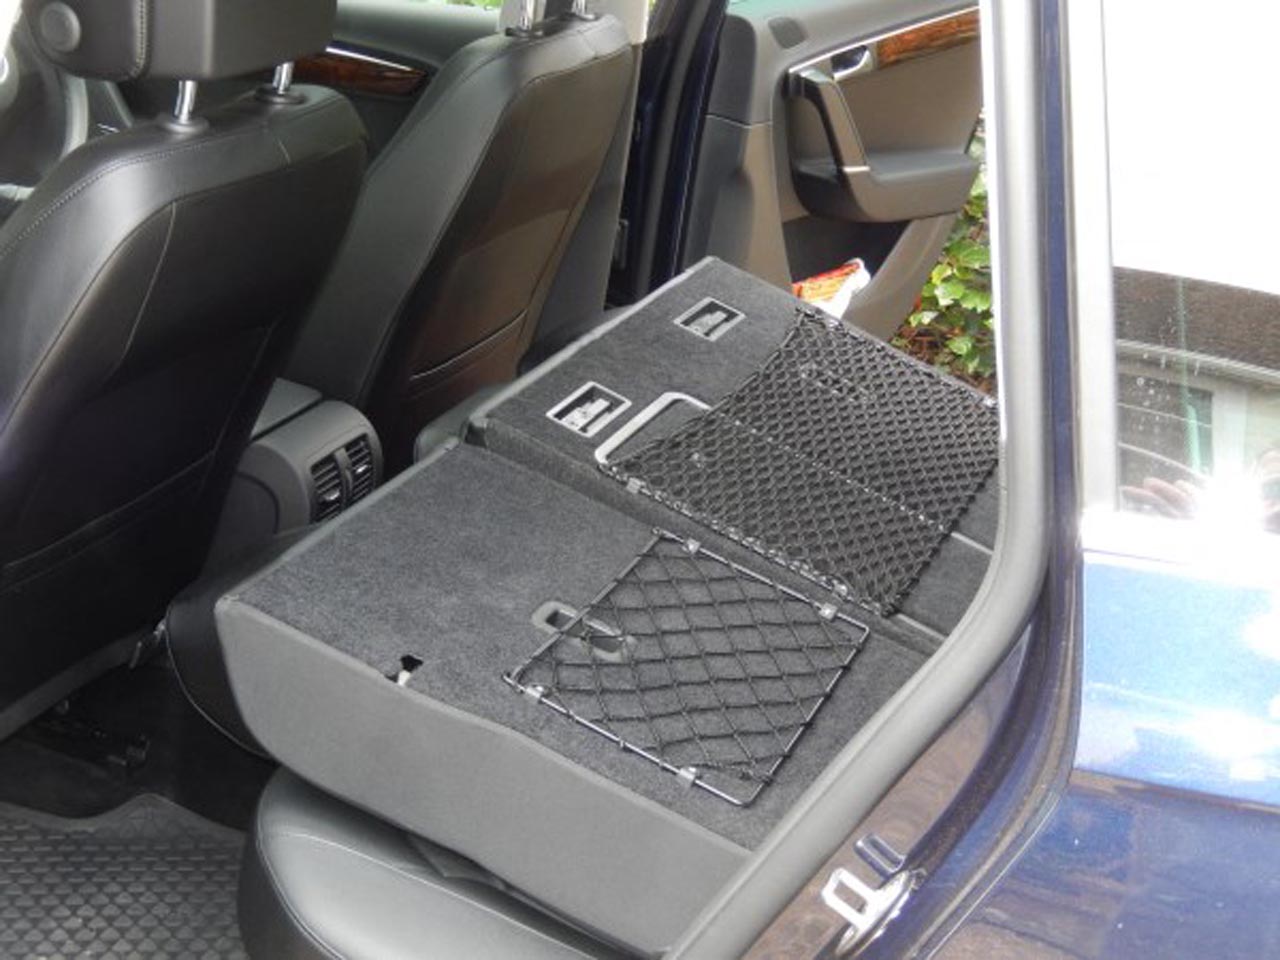 Custom-made frame elastic nets to create storage space behind the rear seats in a VW Passat